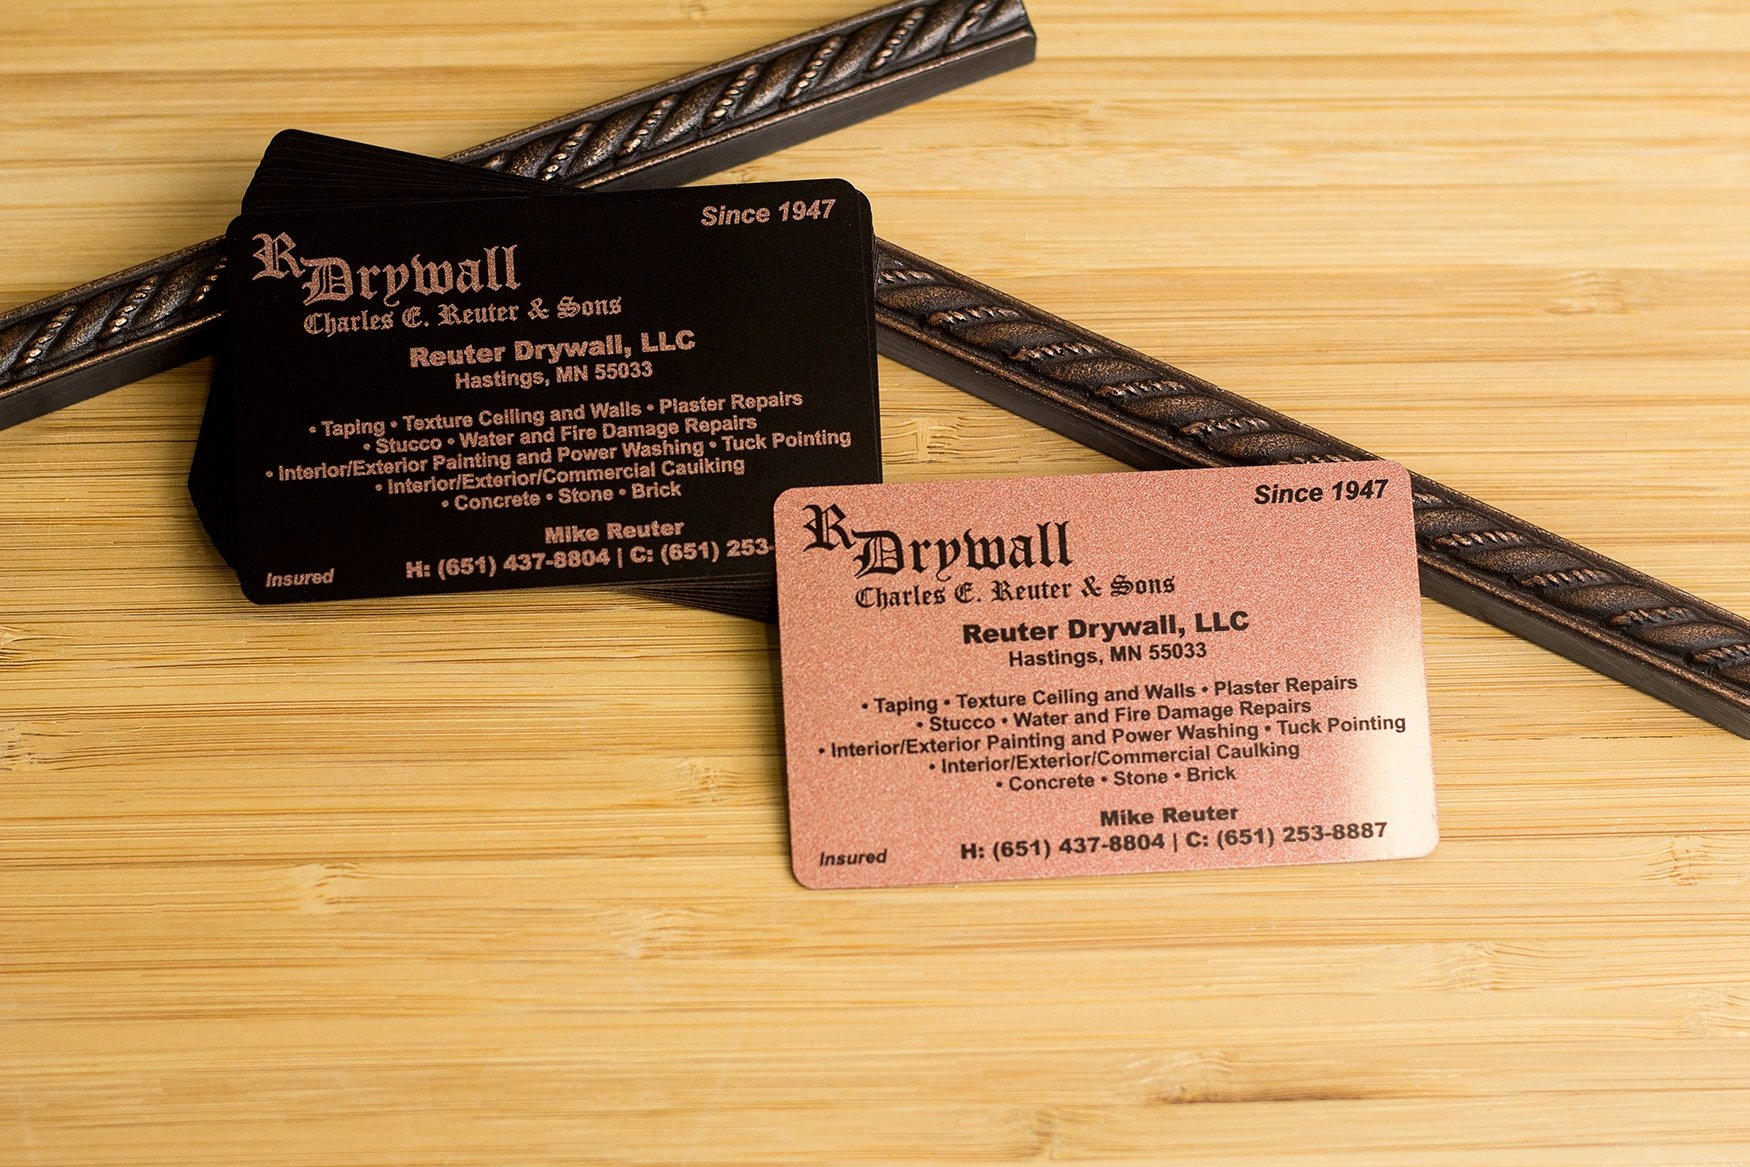 drywall business cards 1